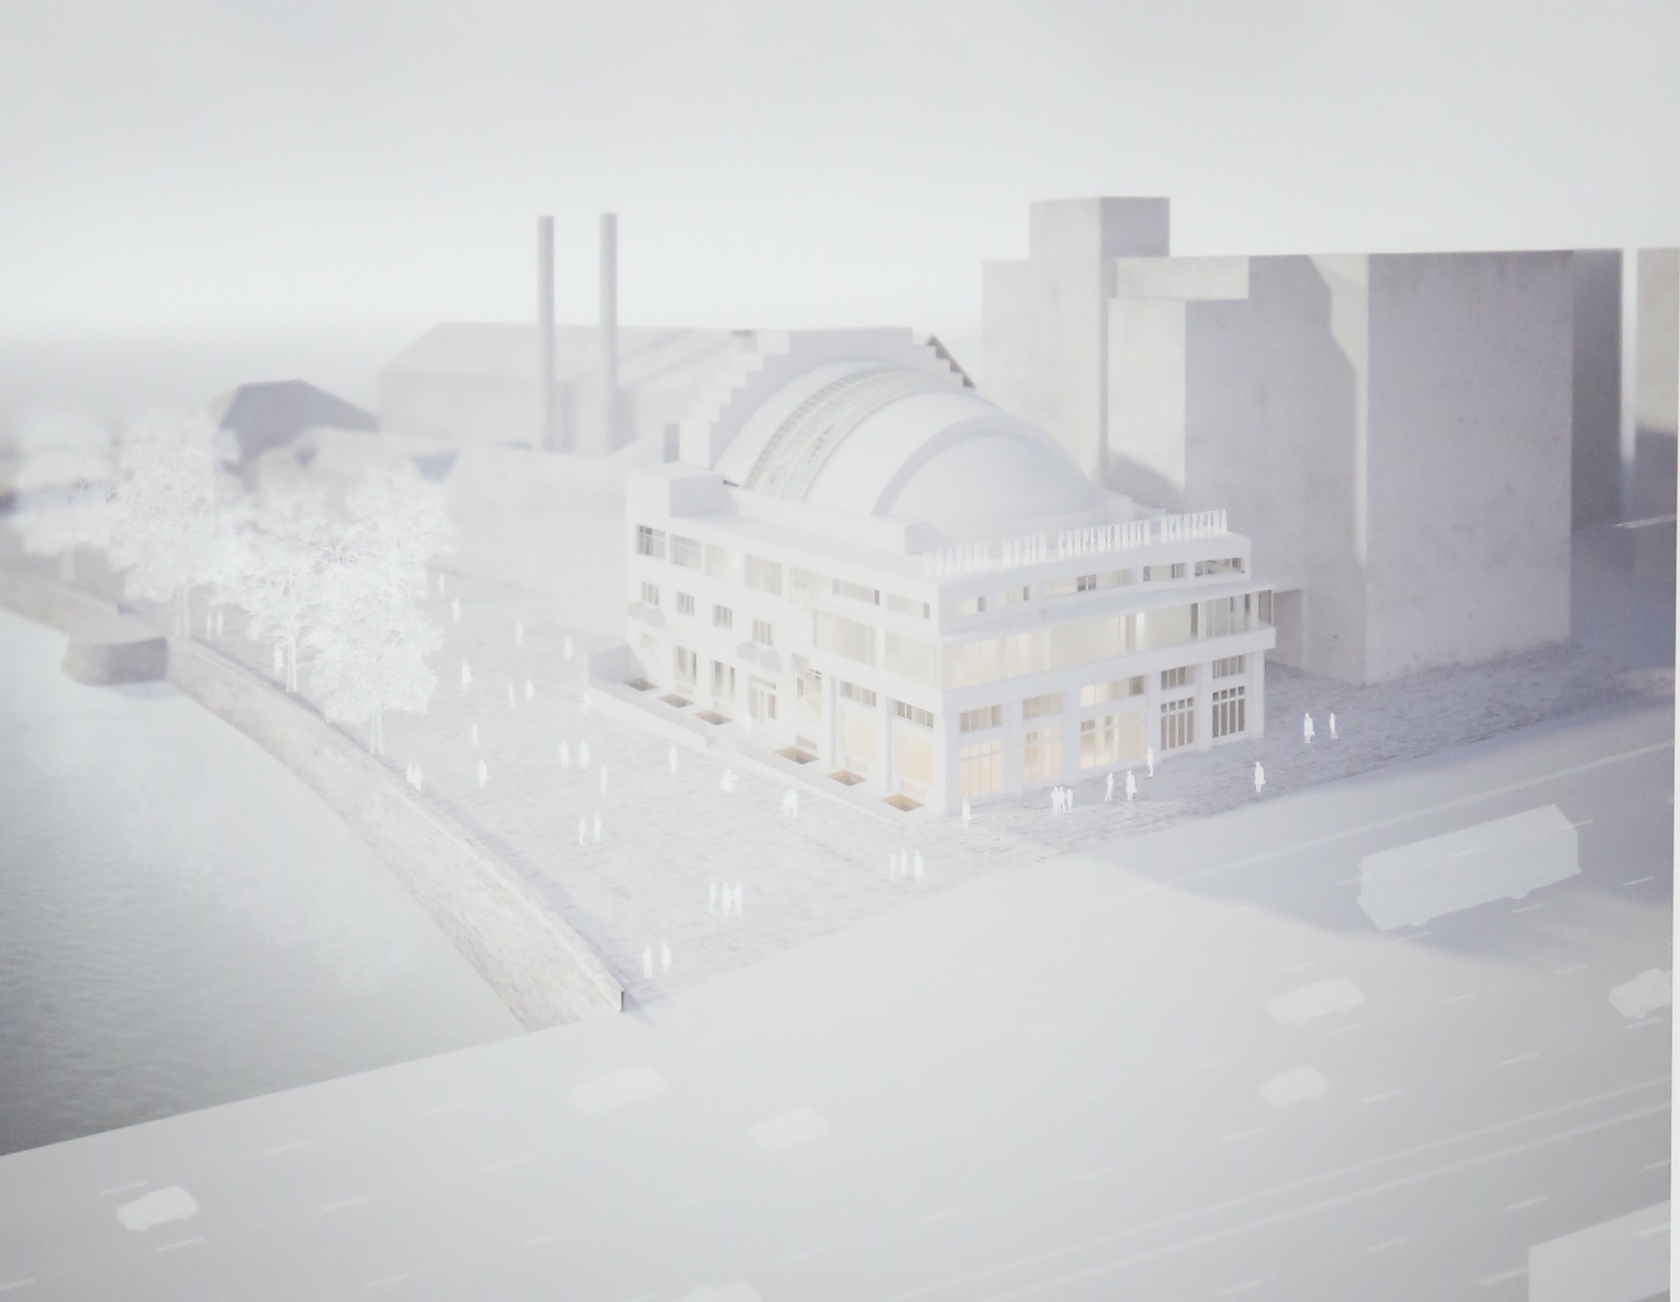 Model proposal for the new museum in the former cinema